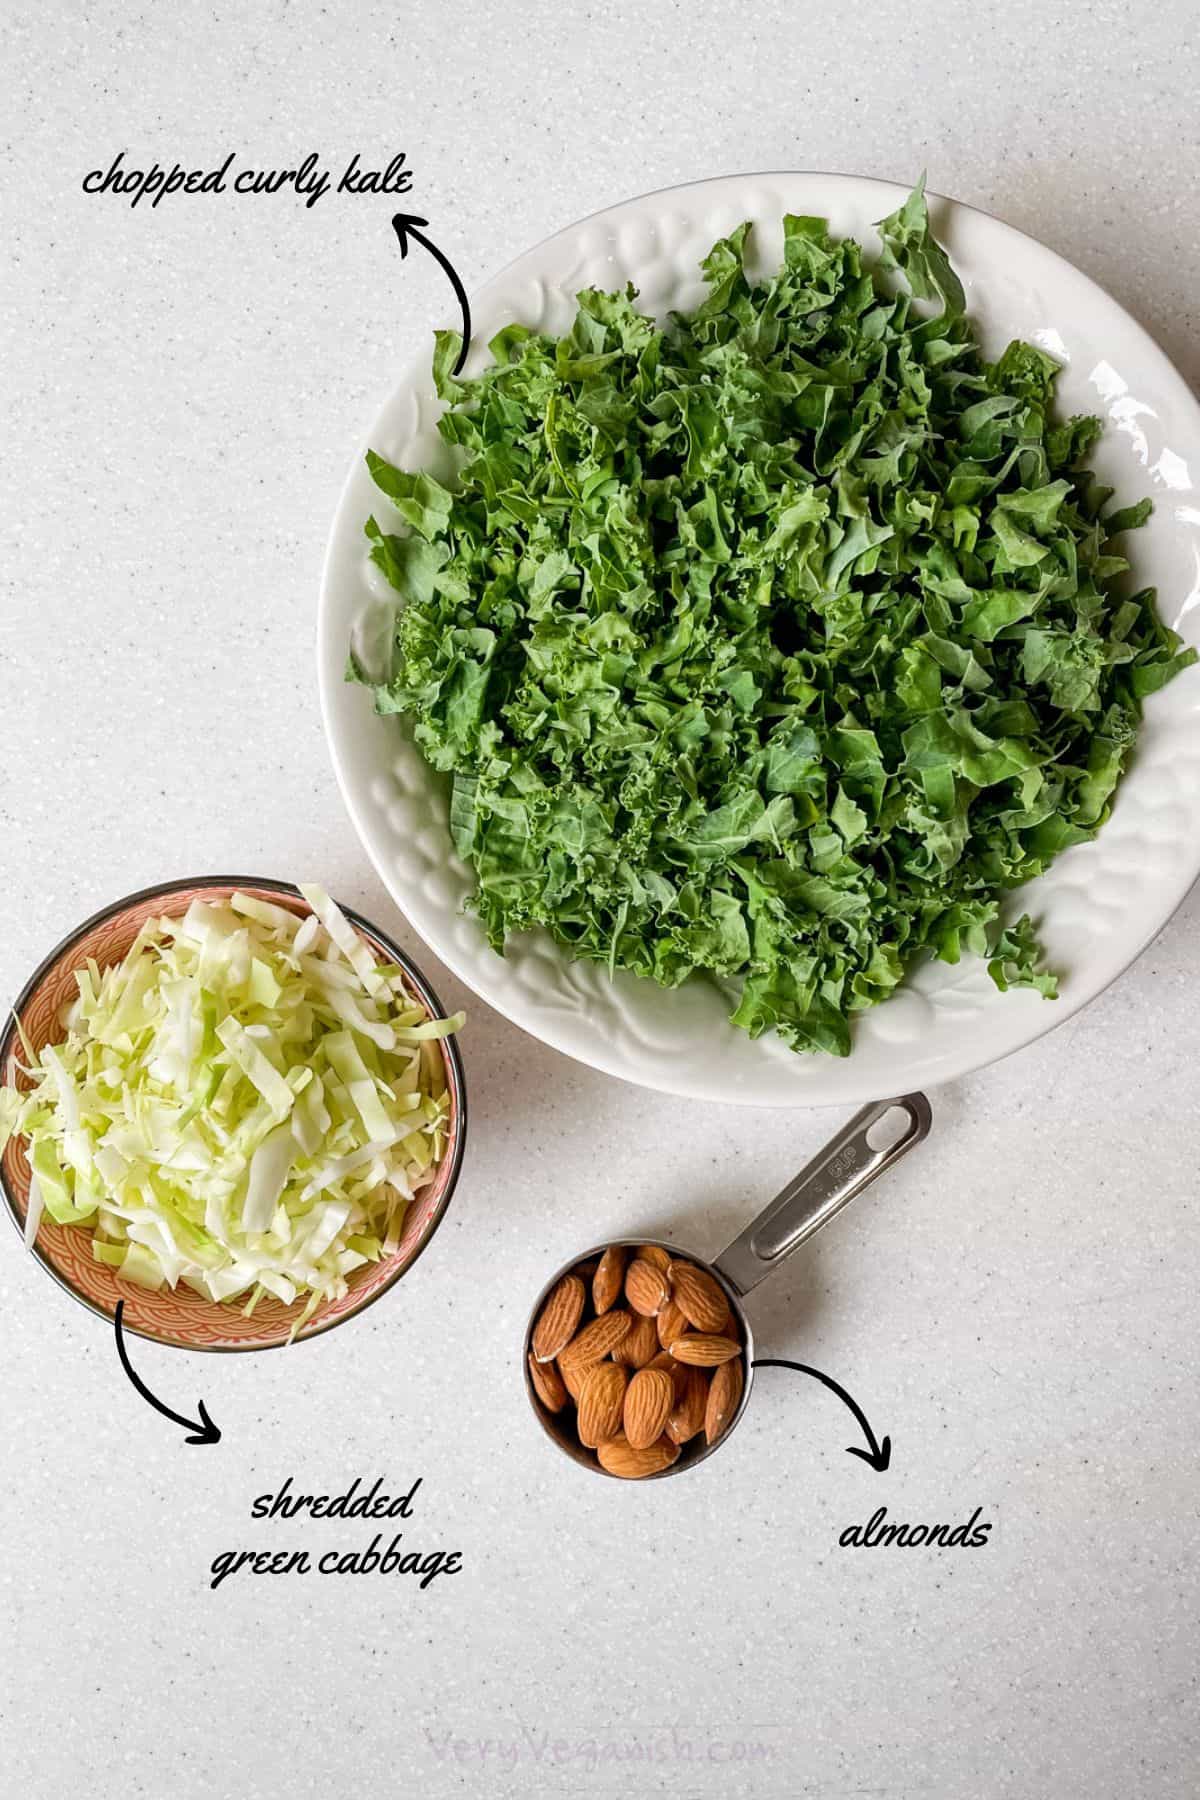 Ingredients for kale crunch salad copycat: chopped curly kale, shredded green cabbage, almonds